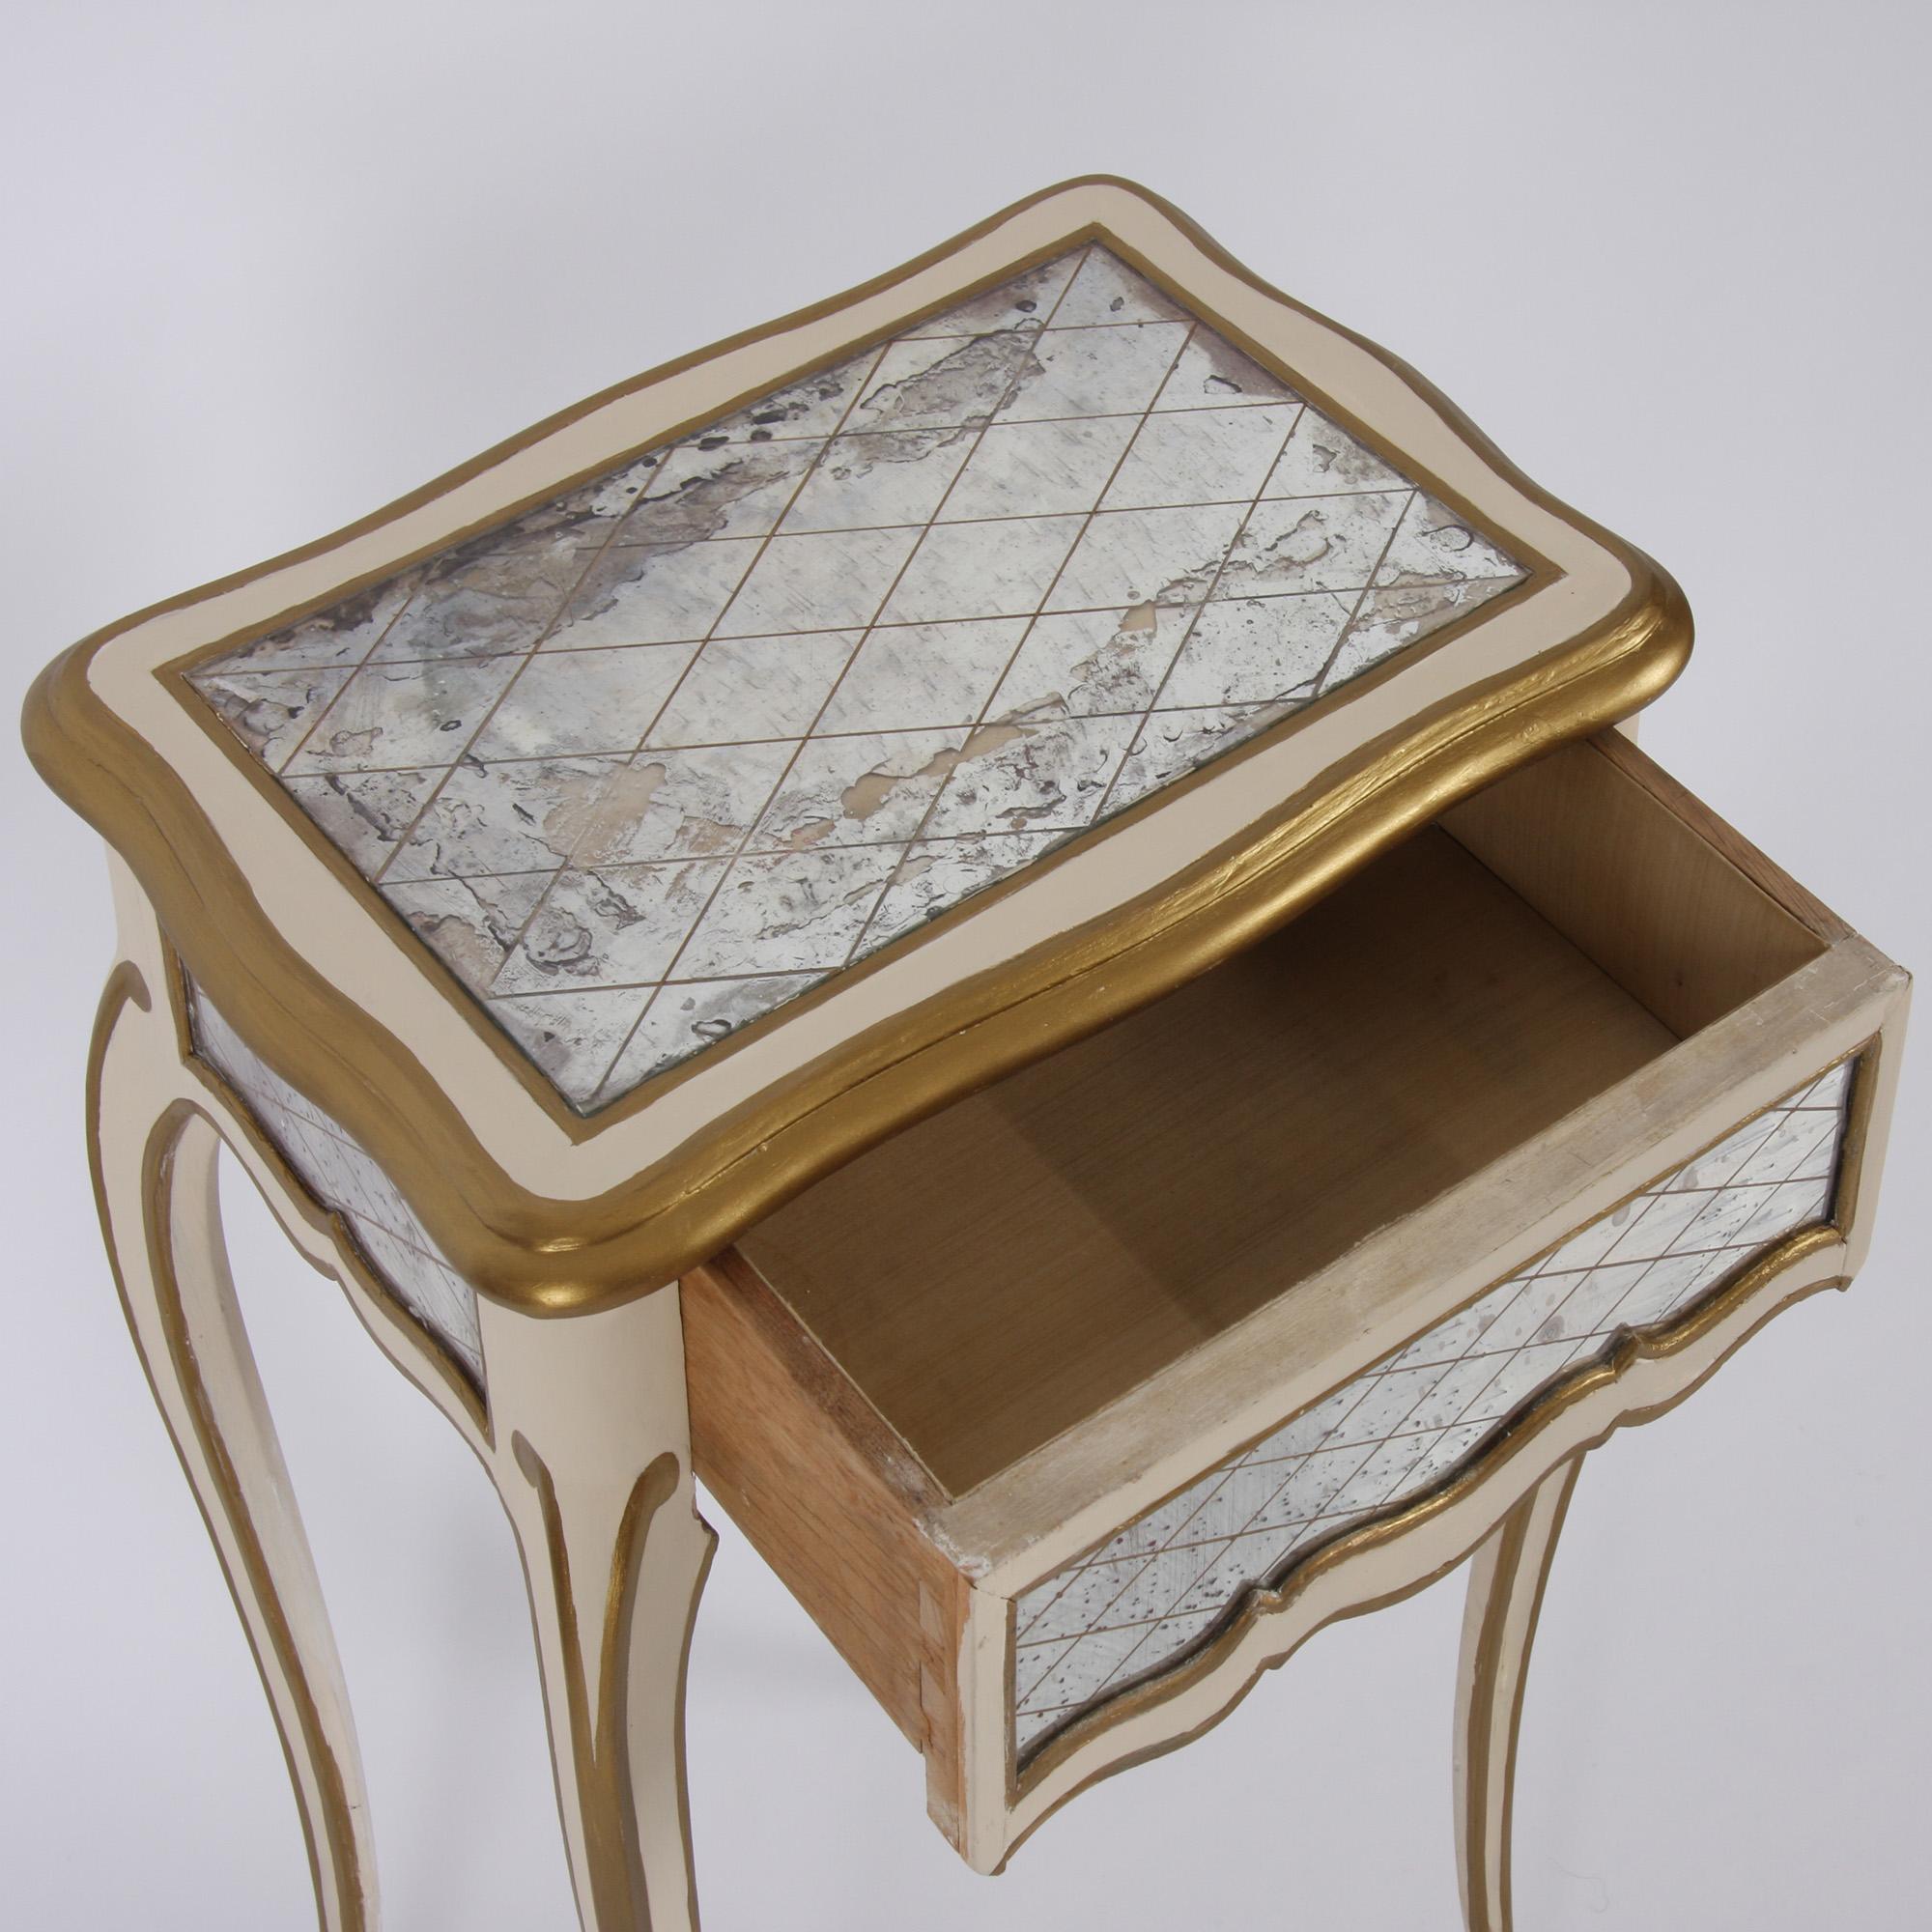 This elegant pair of painted and gilt side tables, with original Verre Églomisé mirror drawers, date back to 1950s Italy.